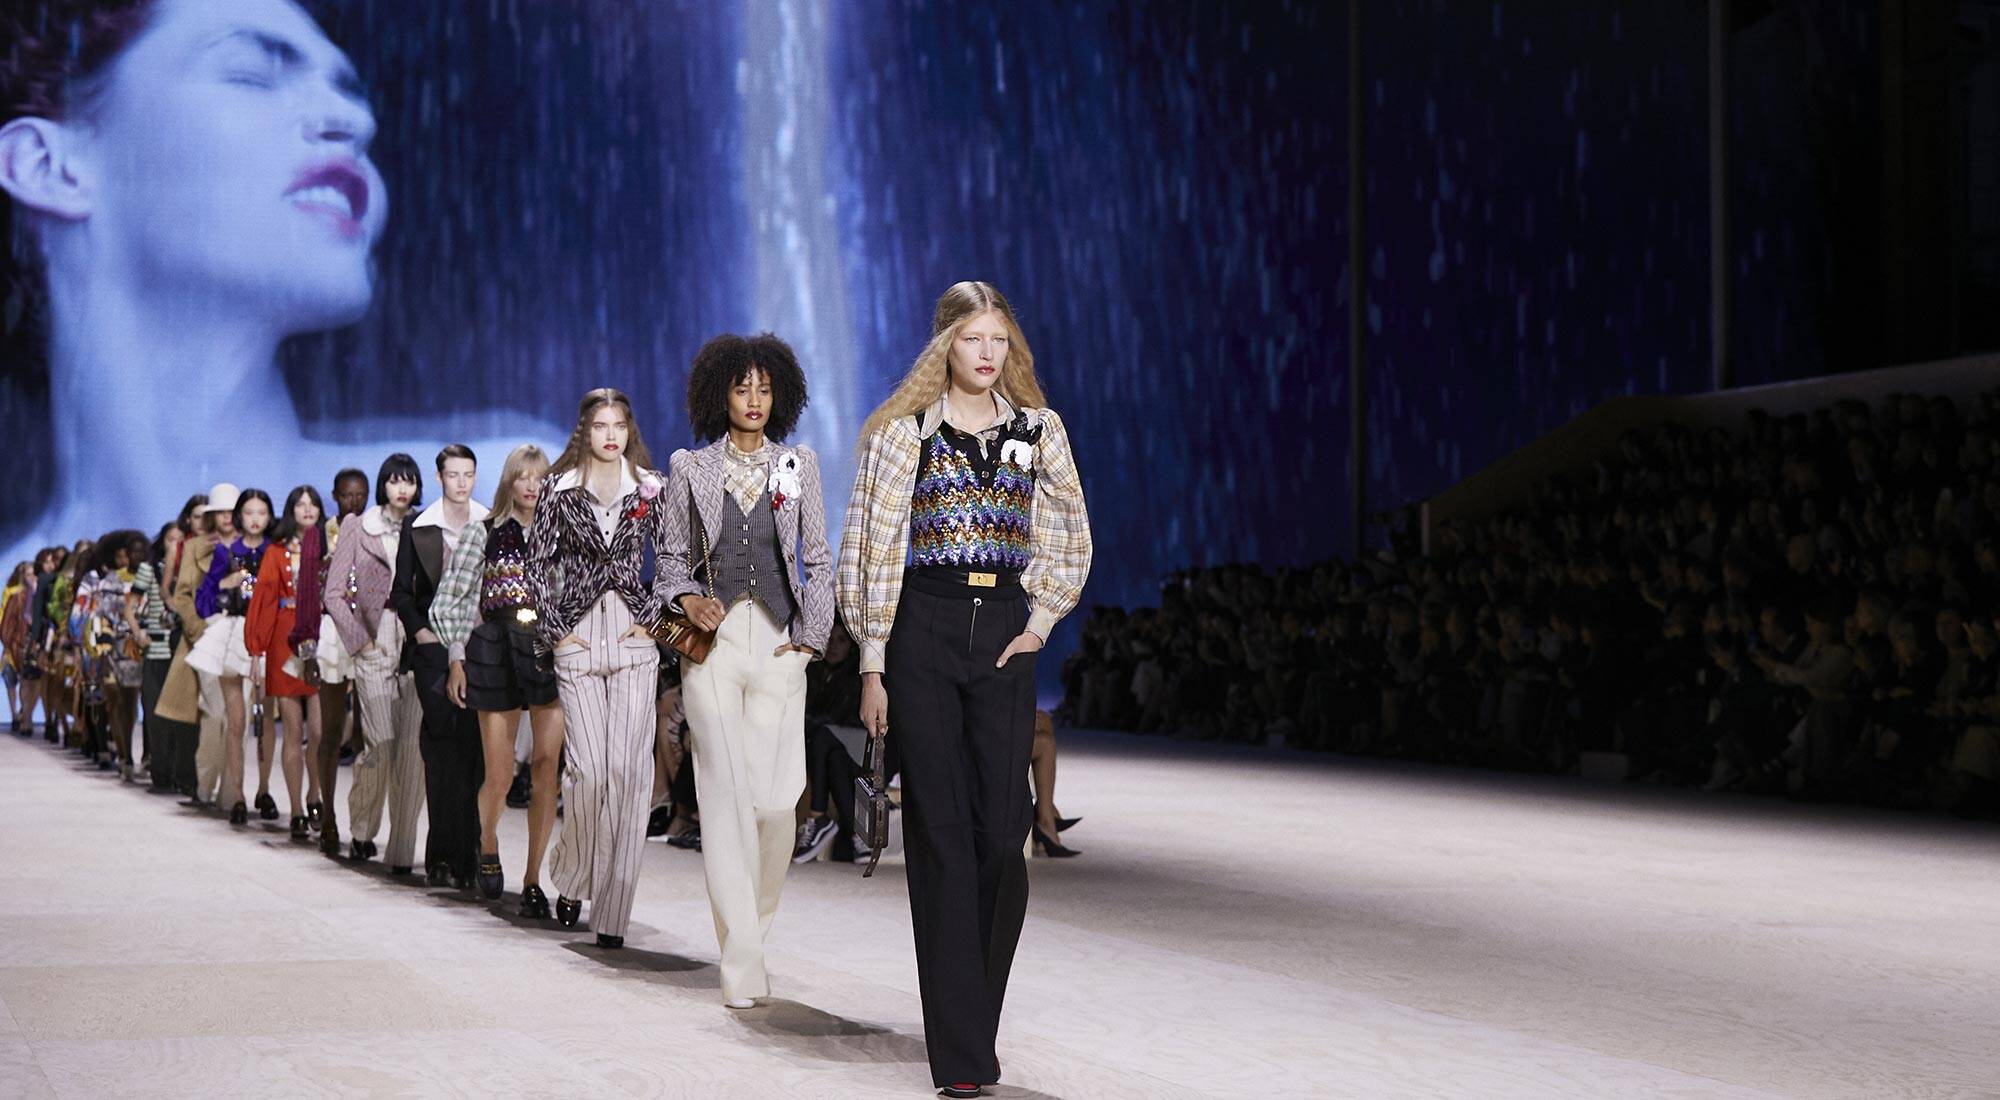 From Milan to Paris, LVMH Fashion Maisons unveil women’s silhouettes for Spring/Summer 2020 - LVMH